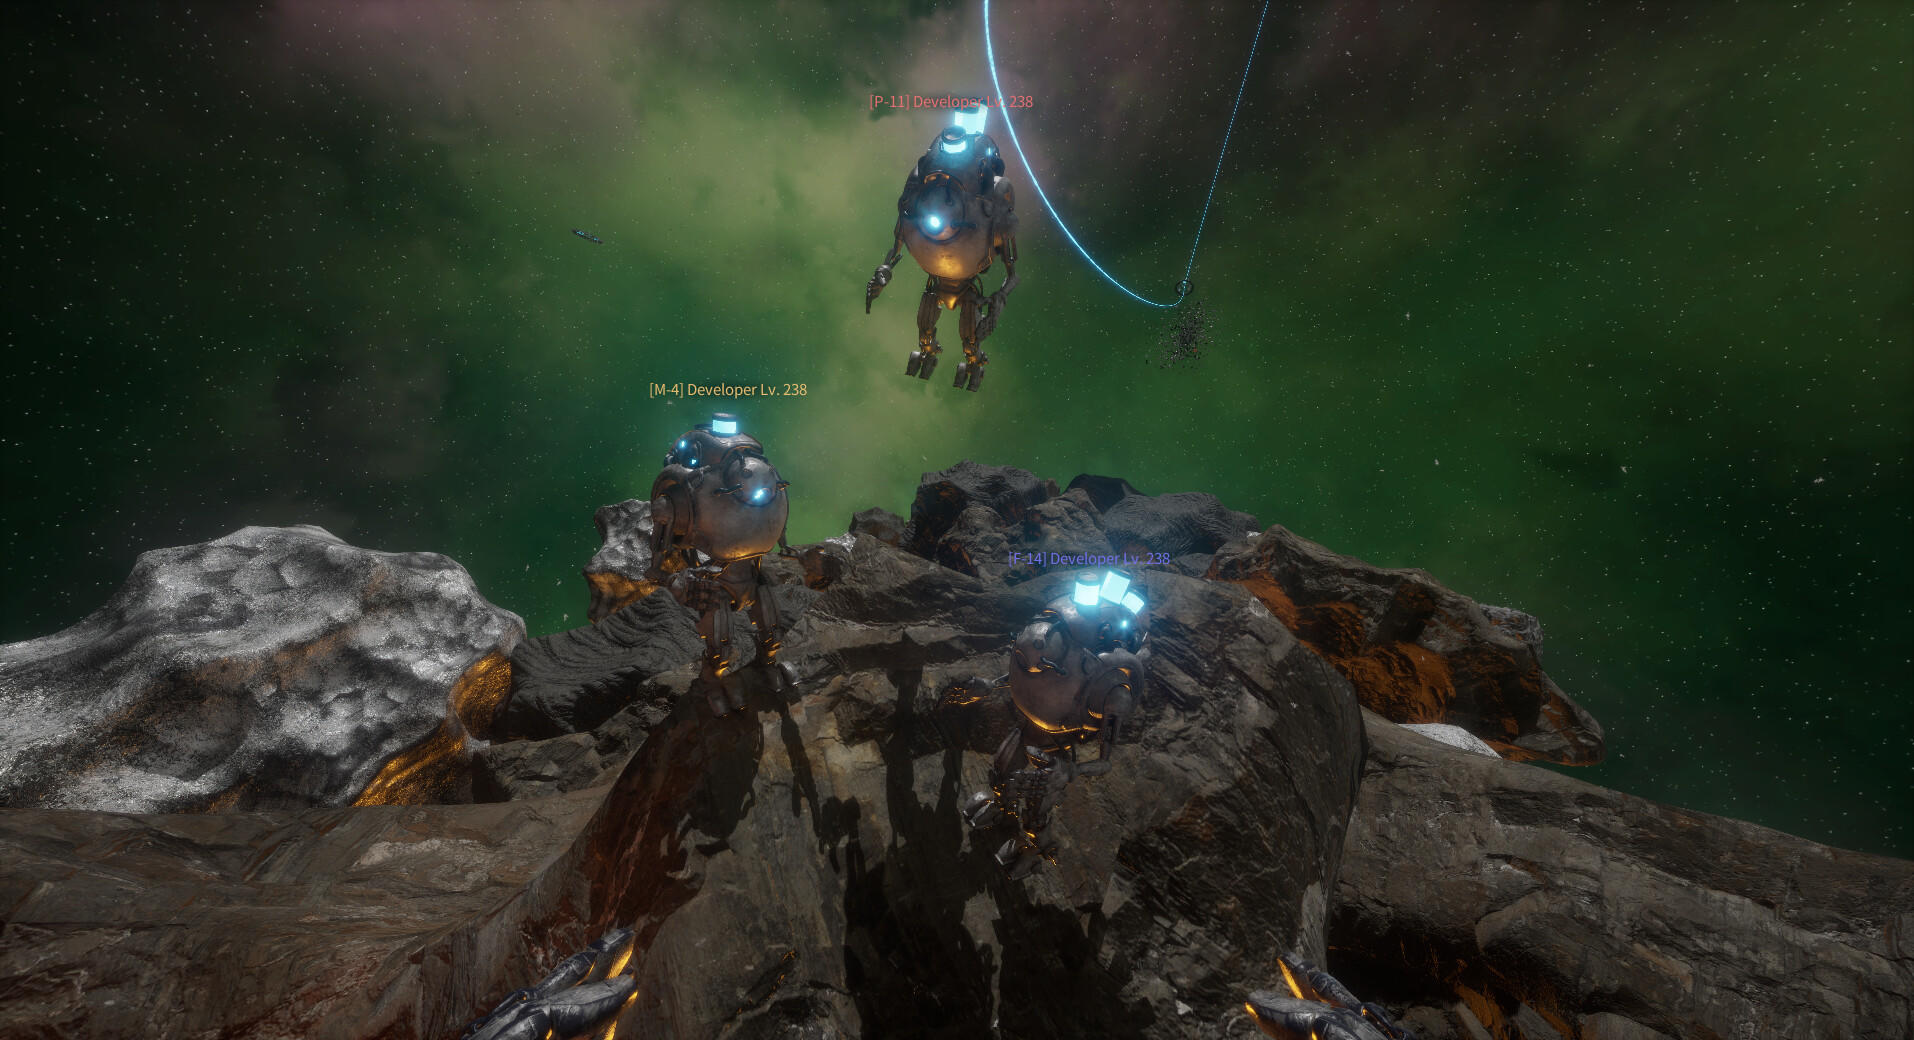 Project Asteroids screenshot game